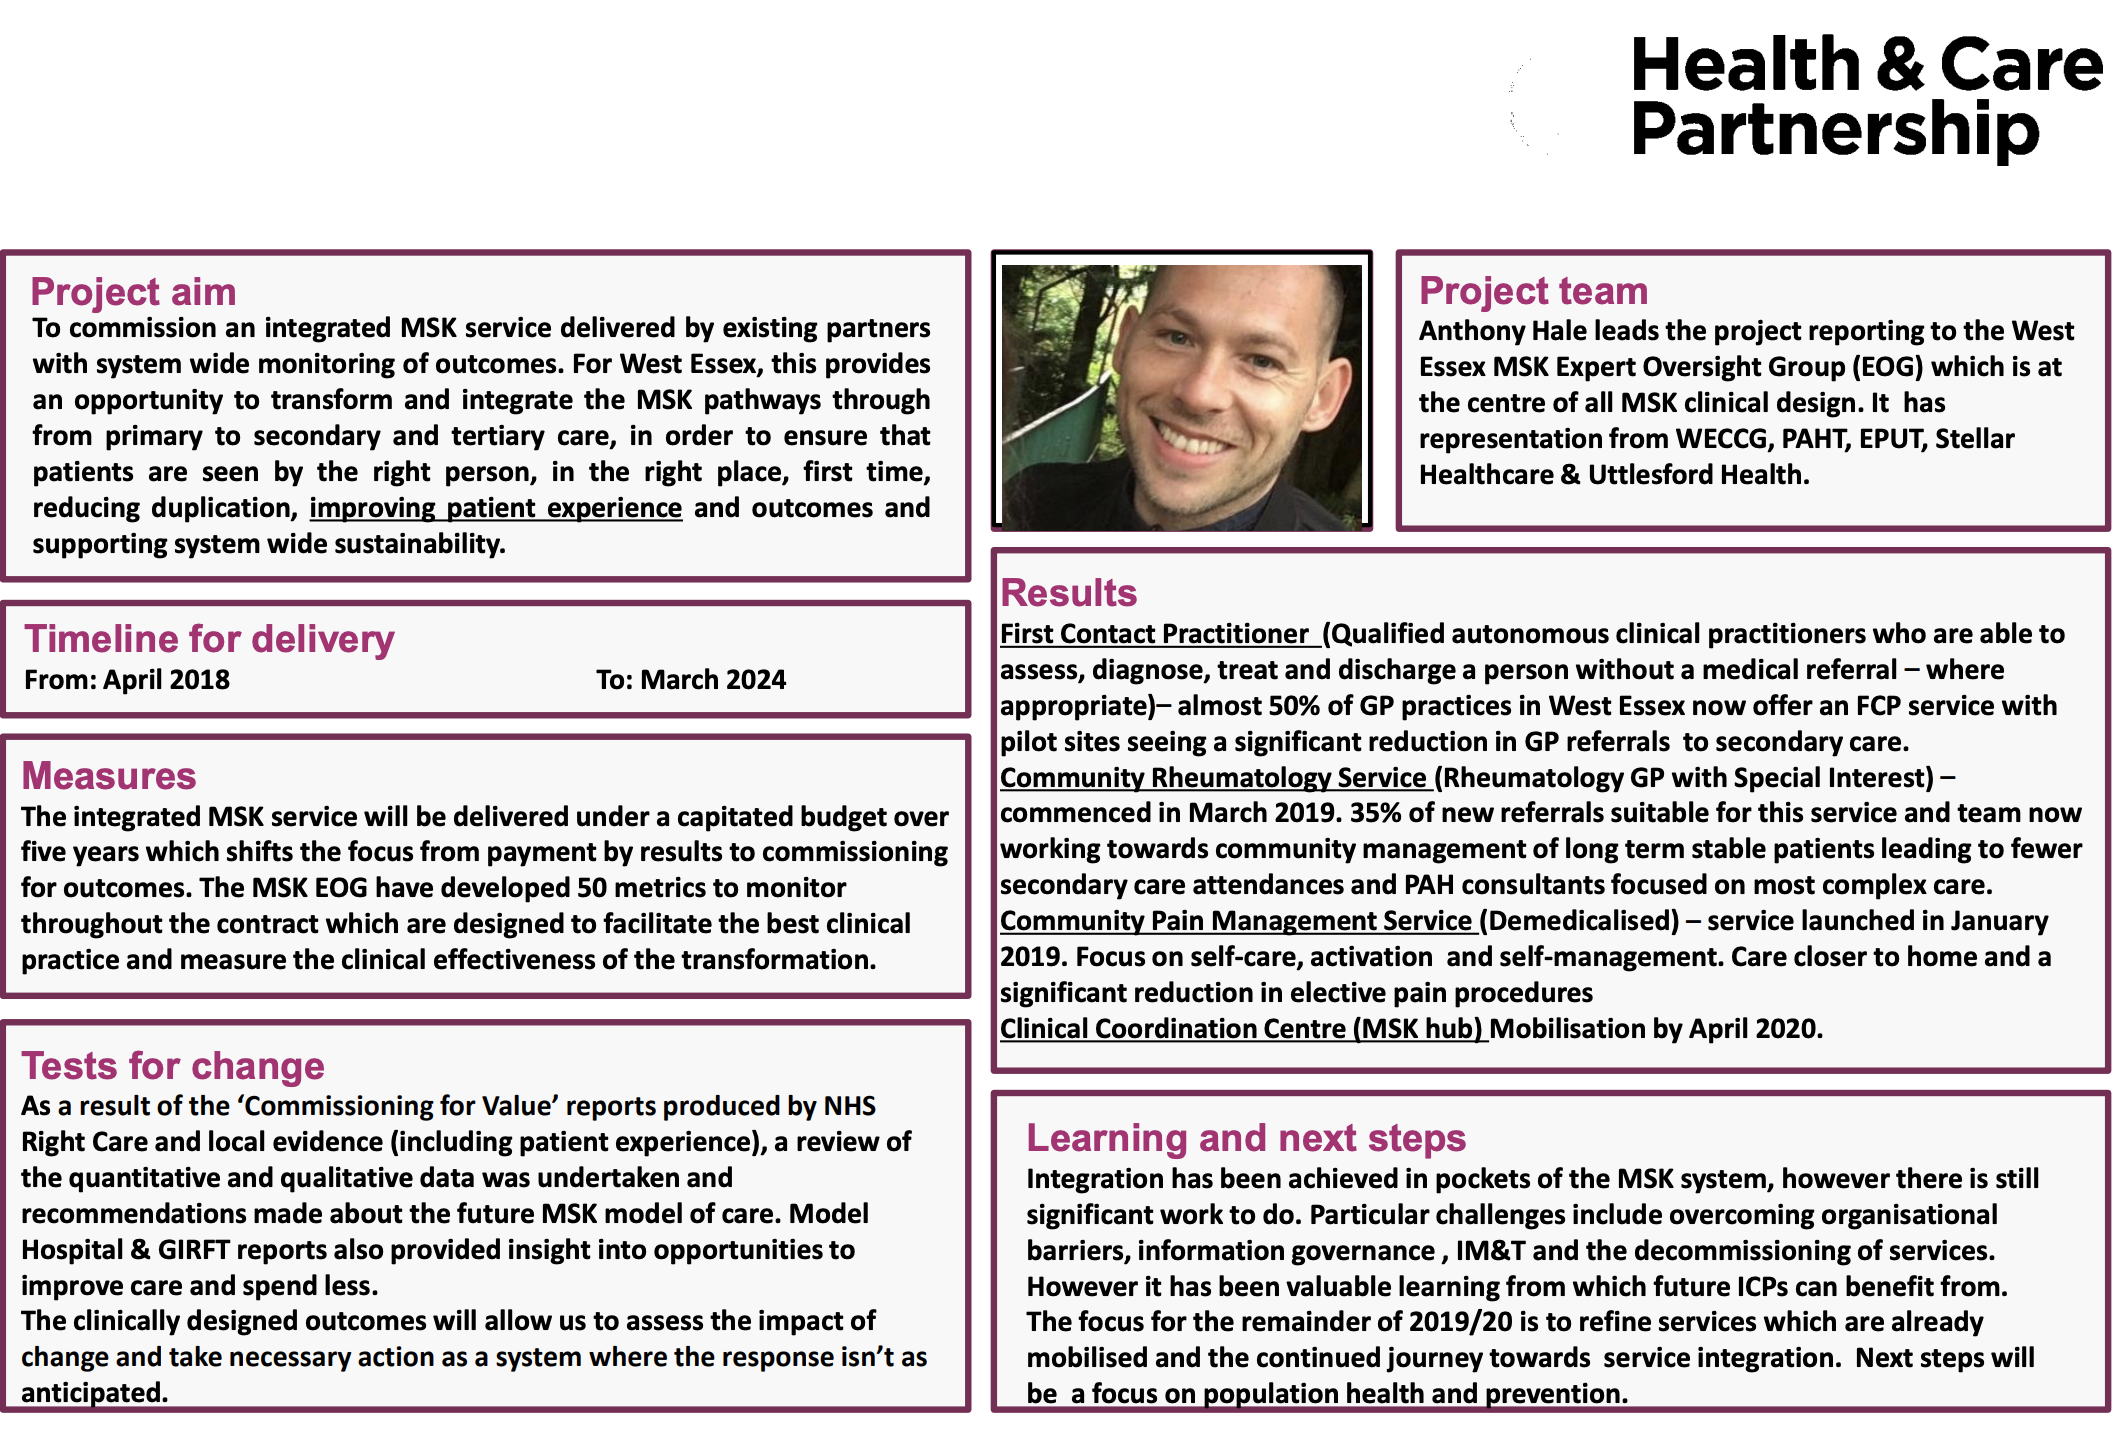 West Essex One Health Care Partnership - MSK Programme - @QualityFirstPAH featured image